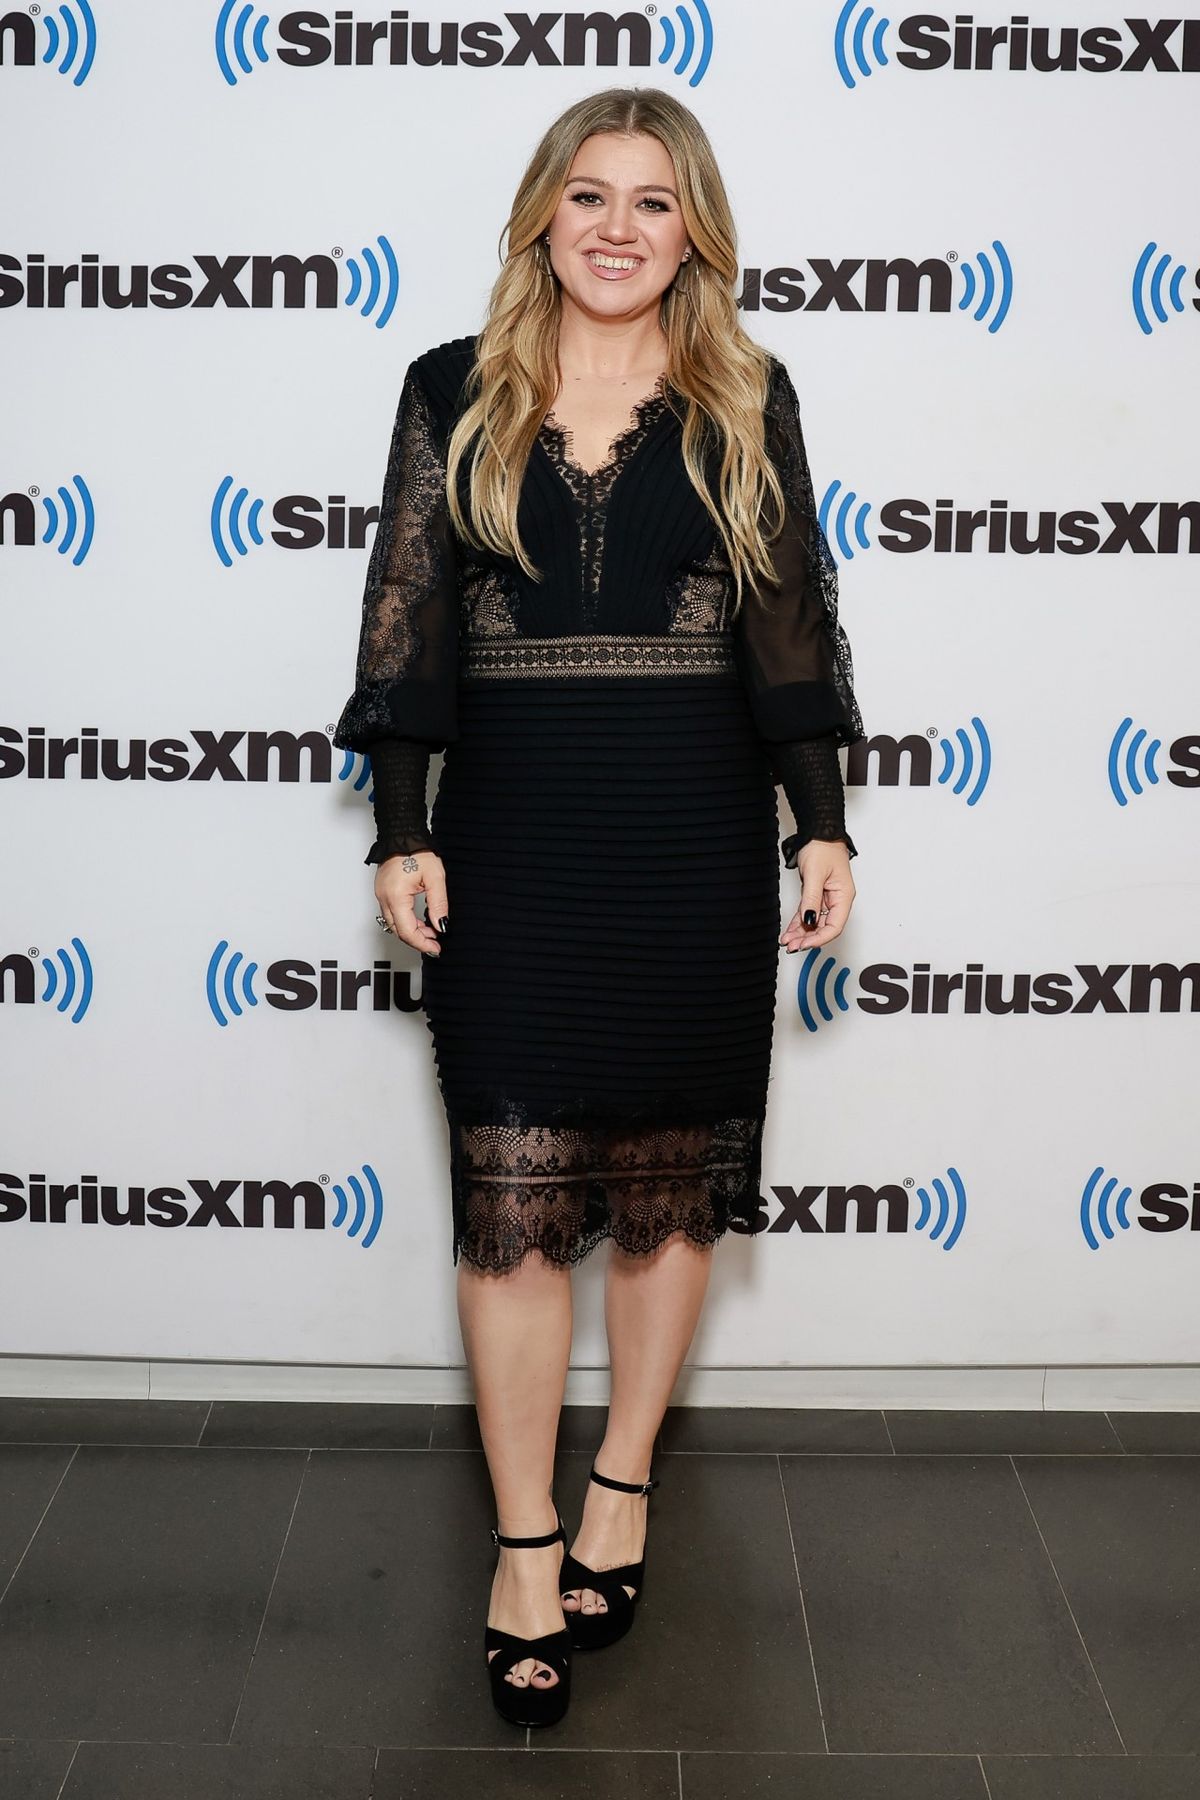 Kelly Clarkson Has Dropped 40 Lbs Since Her Divorce, But Is Now Dealing